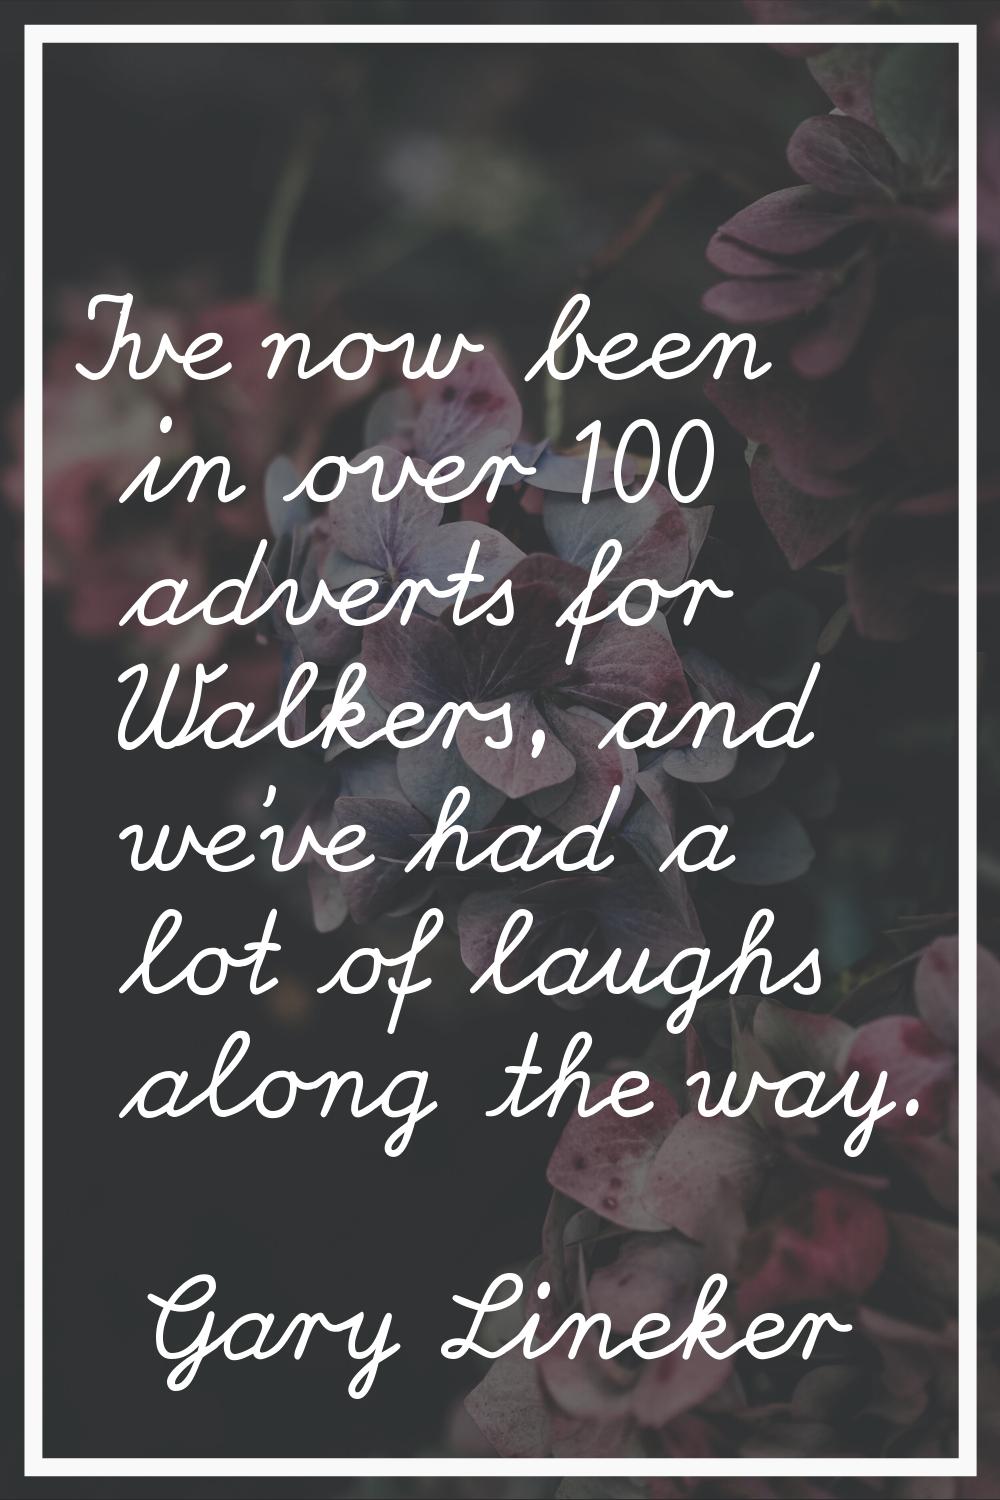 I've now been in over 100 adverts for Walkers, and we've had a lot of laughs along the way.